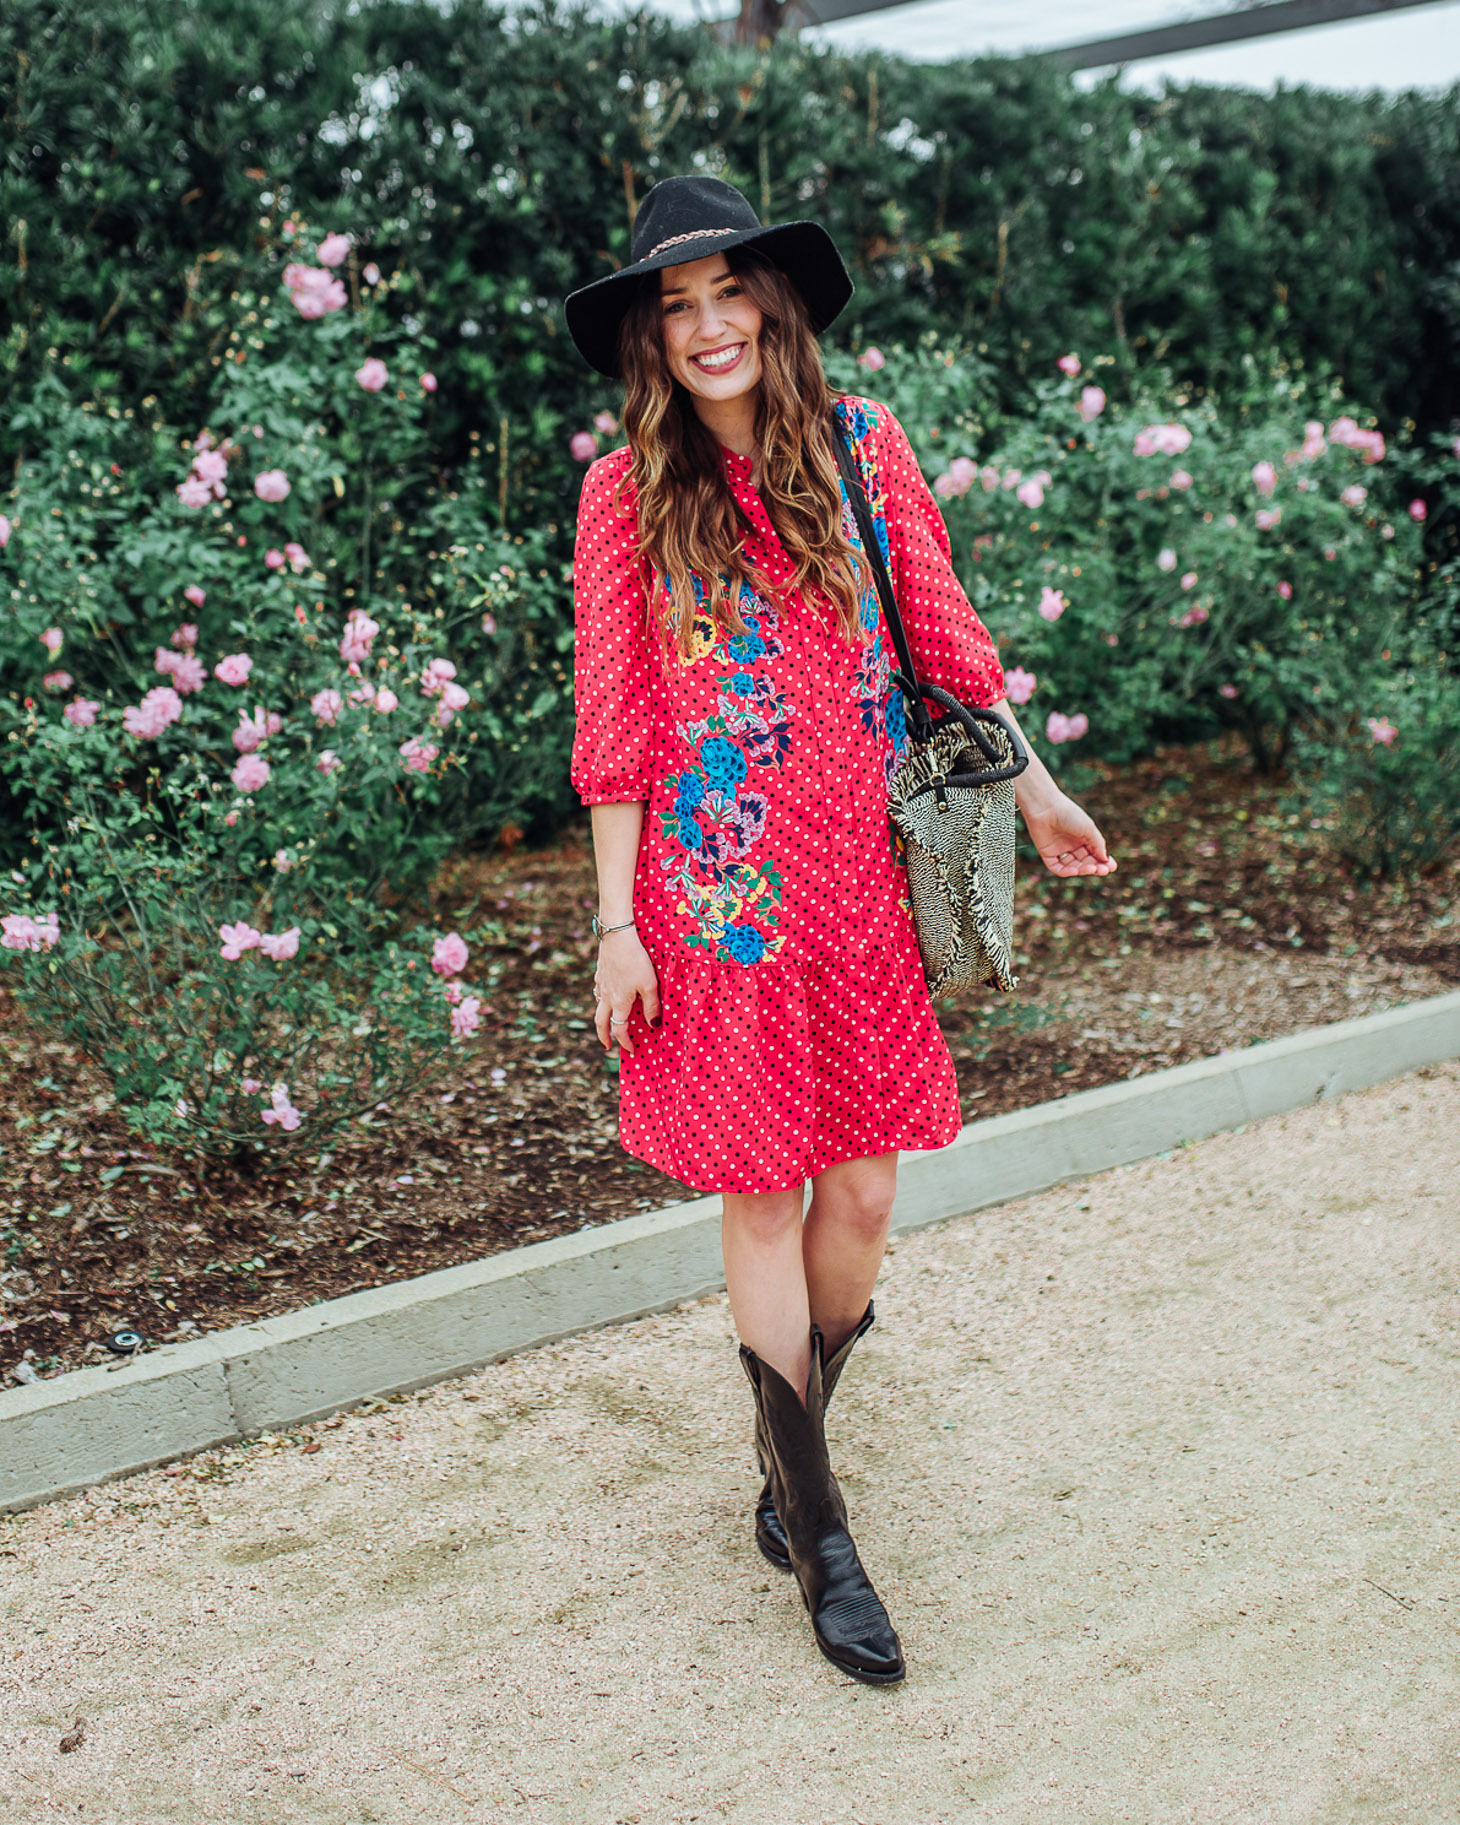 Cute Cowboy Boots roundup featured by top Houston fashion blog, Lone Star Looking Glass: image of a woman wearing Lucchese cowboy boots available at Zappos, a SALONI floral dress, Nordstrom Panama hat